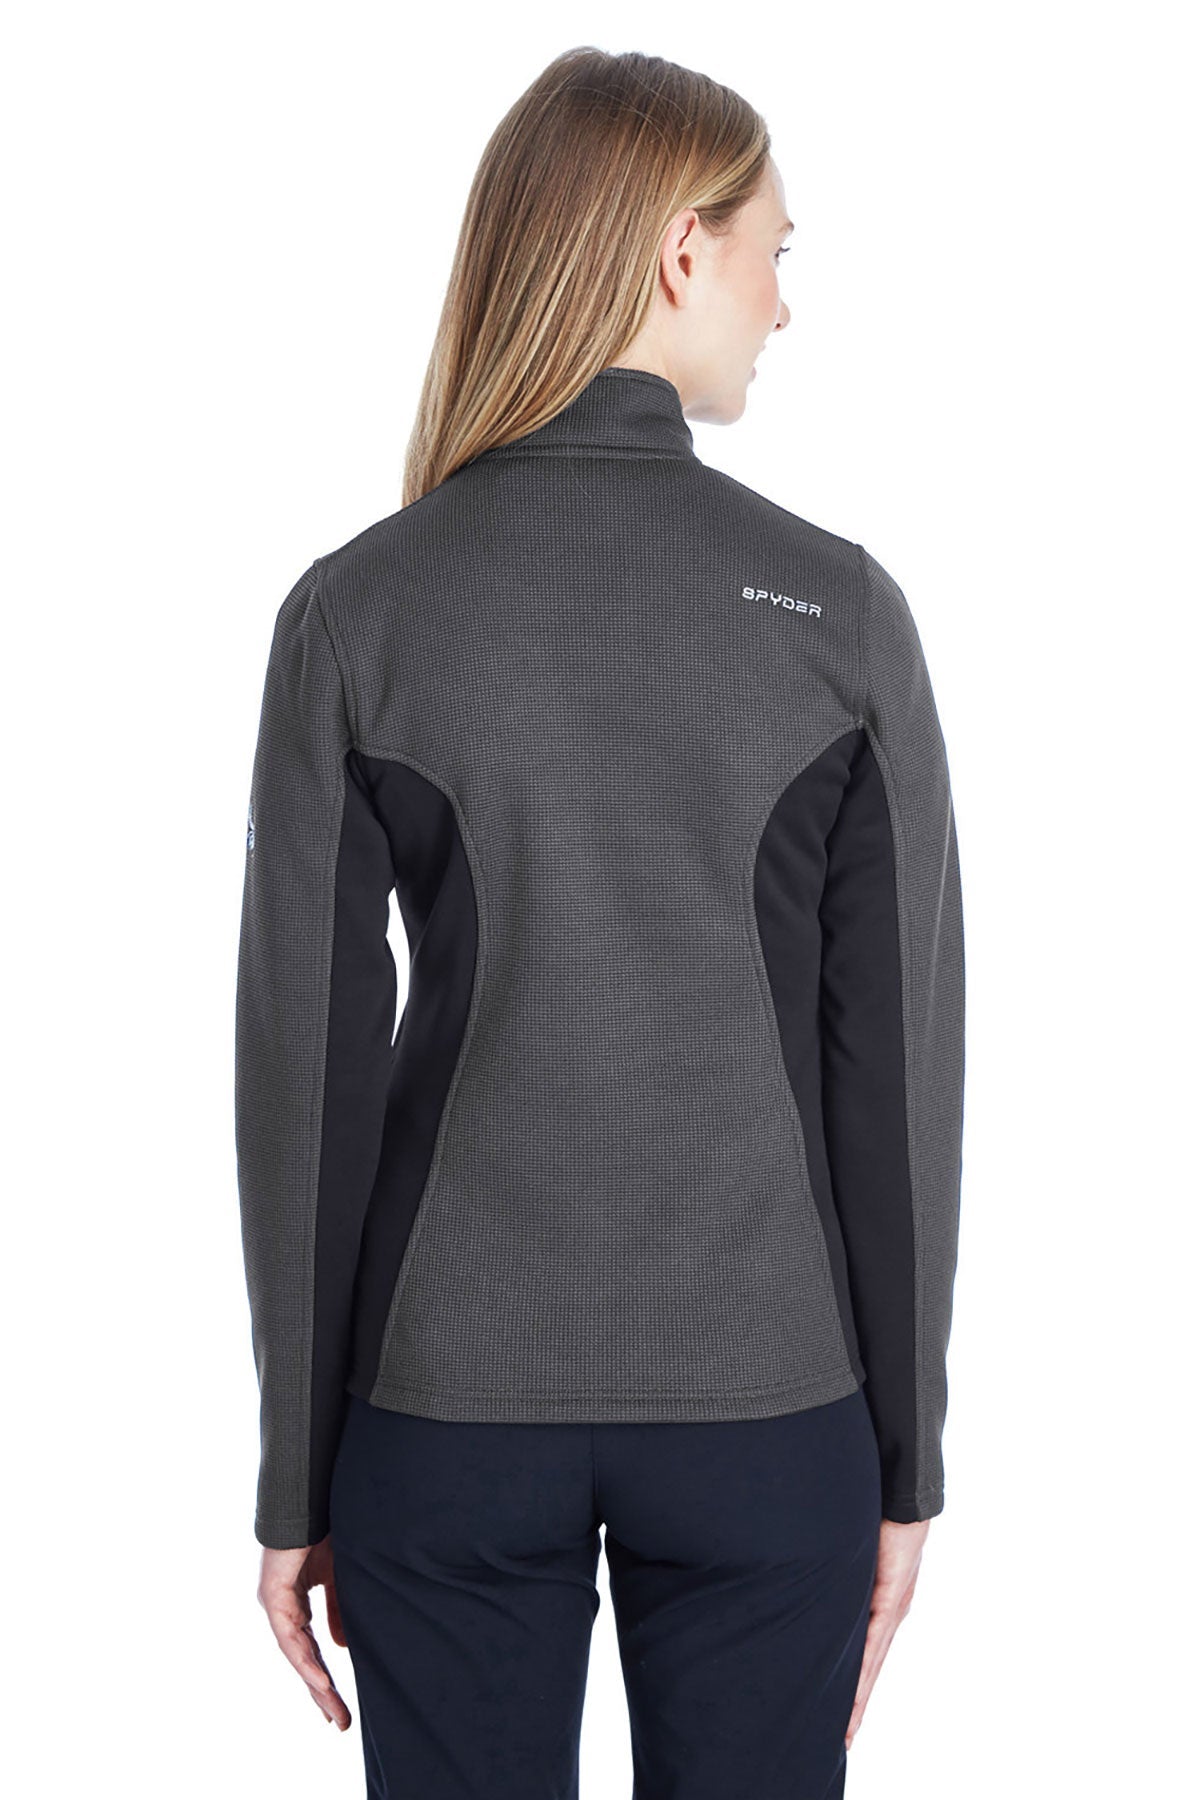 Spyder Ladies Zip-Up Sweater Jacket, Polar/Black/White [GuidePoint Security]